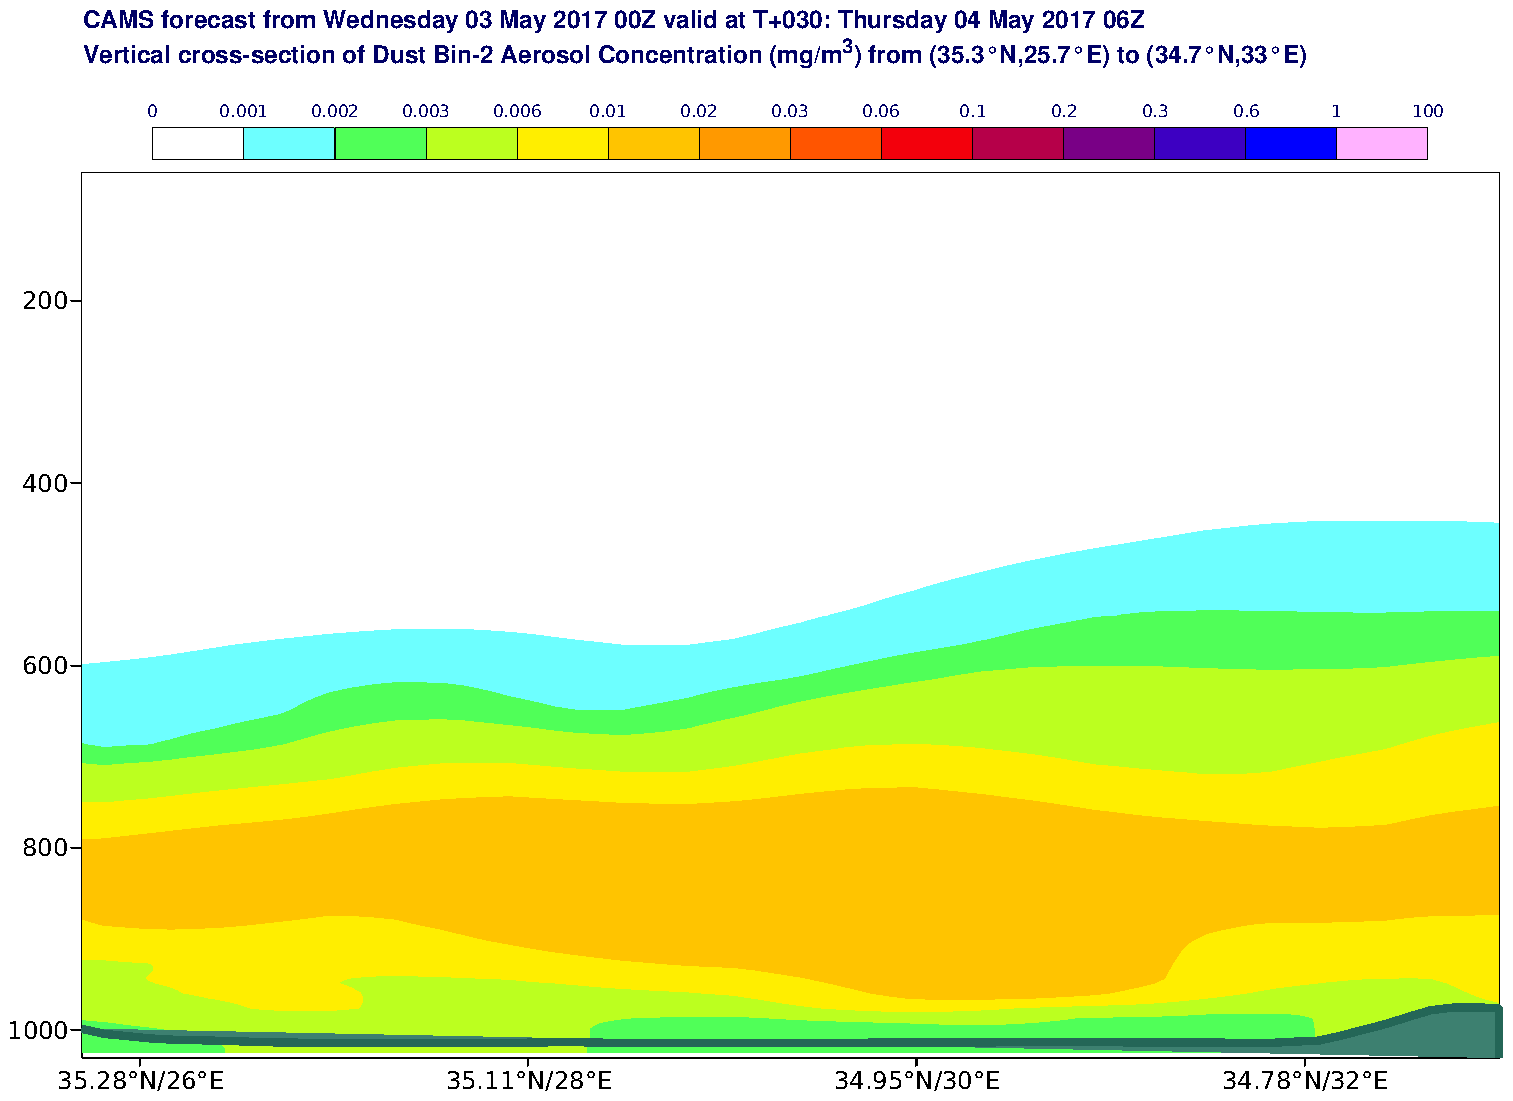 Vertical cross-section of Dust Bin-2 Aerosol Concentration (mg/m3) valid at T30 - 2017-05-04 06:00